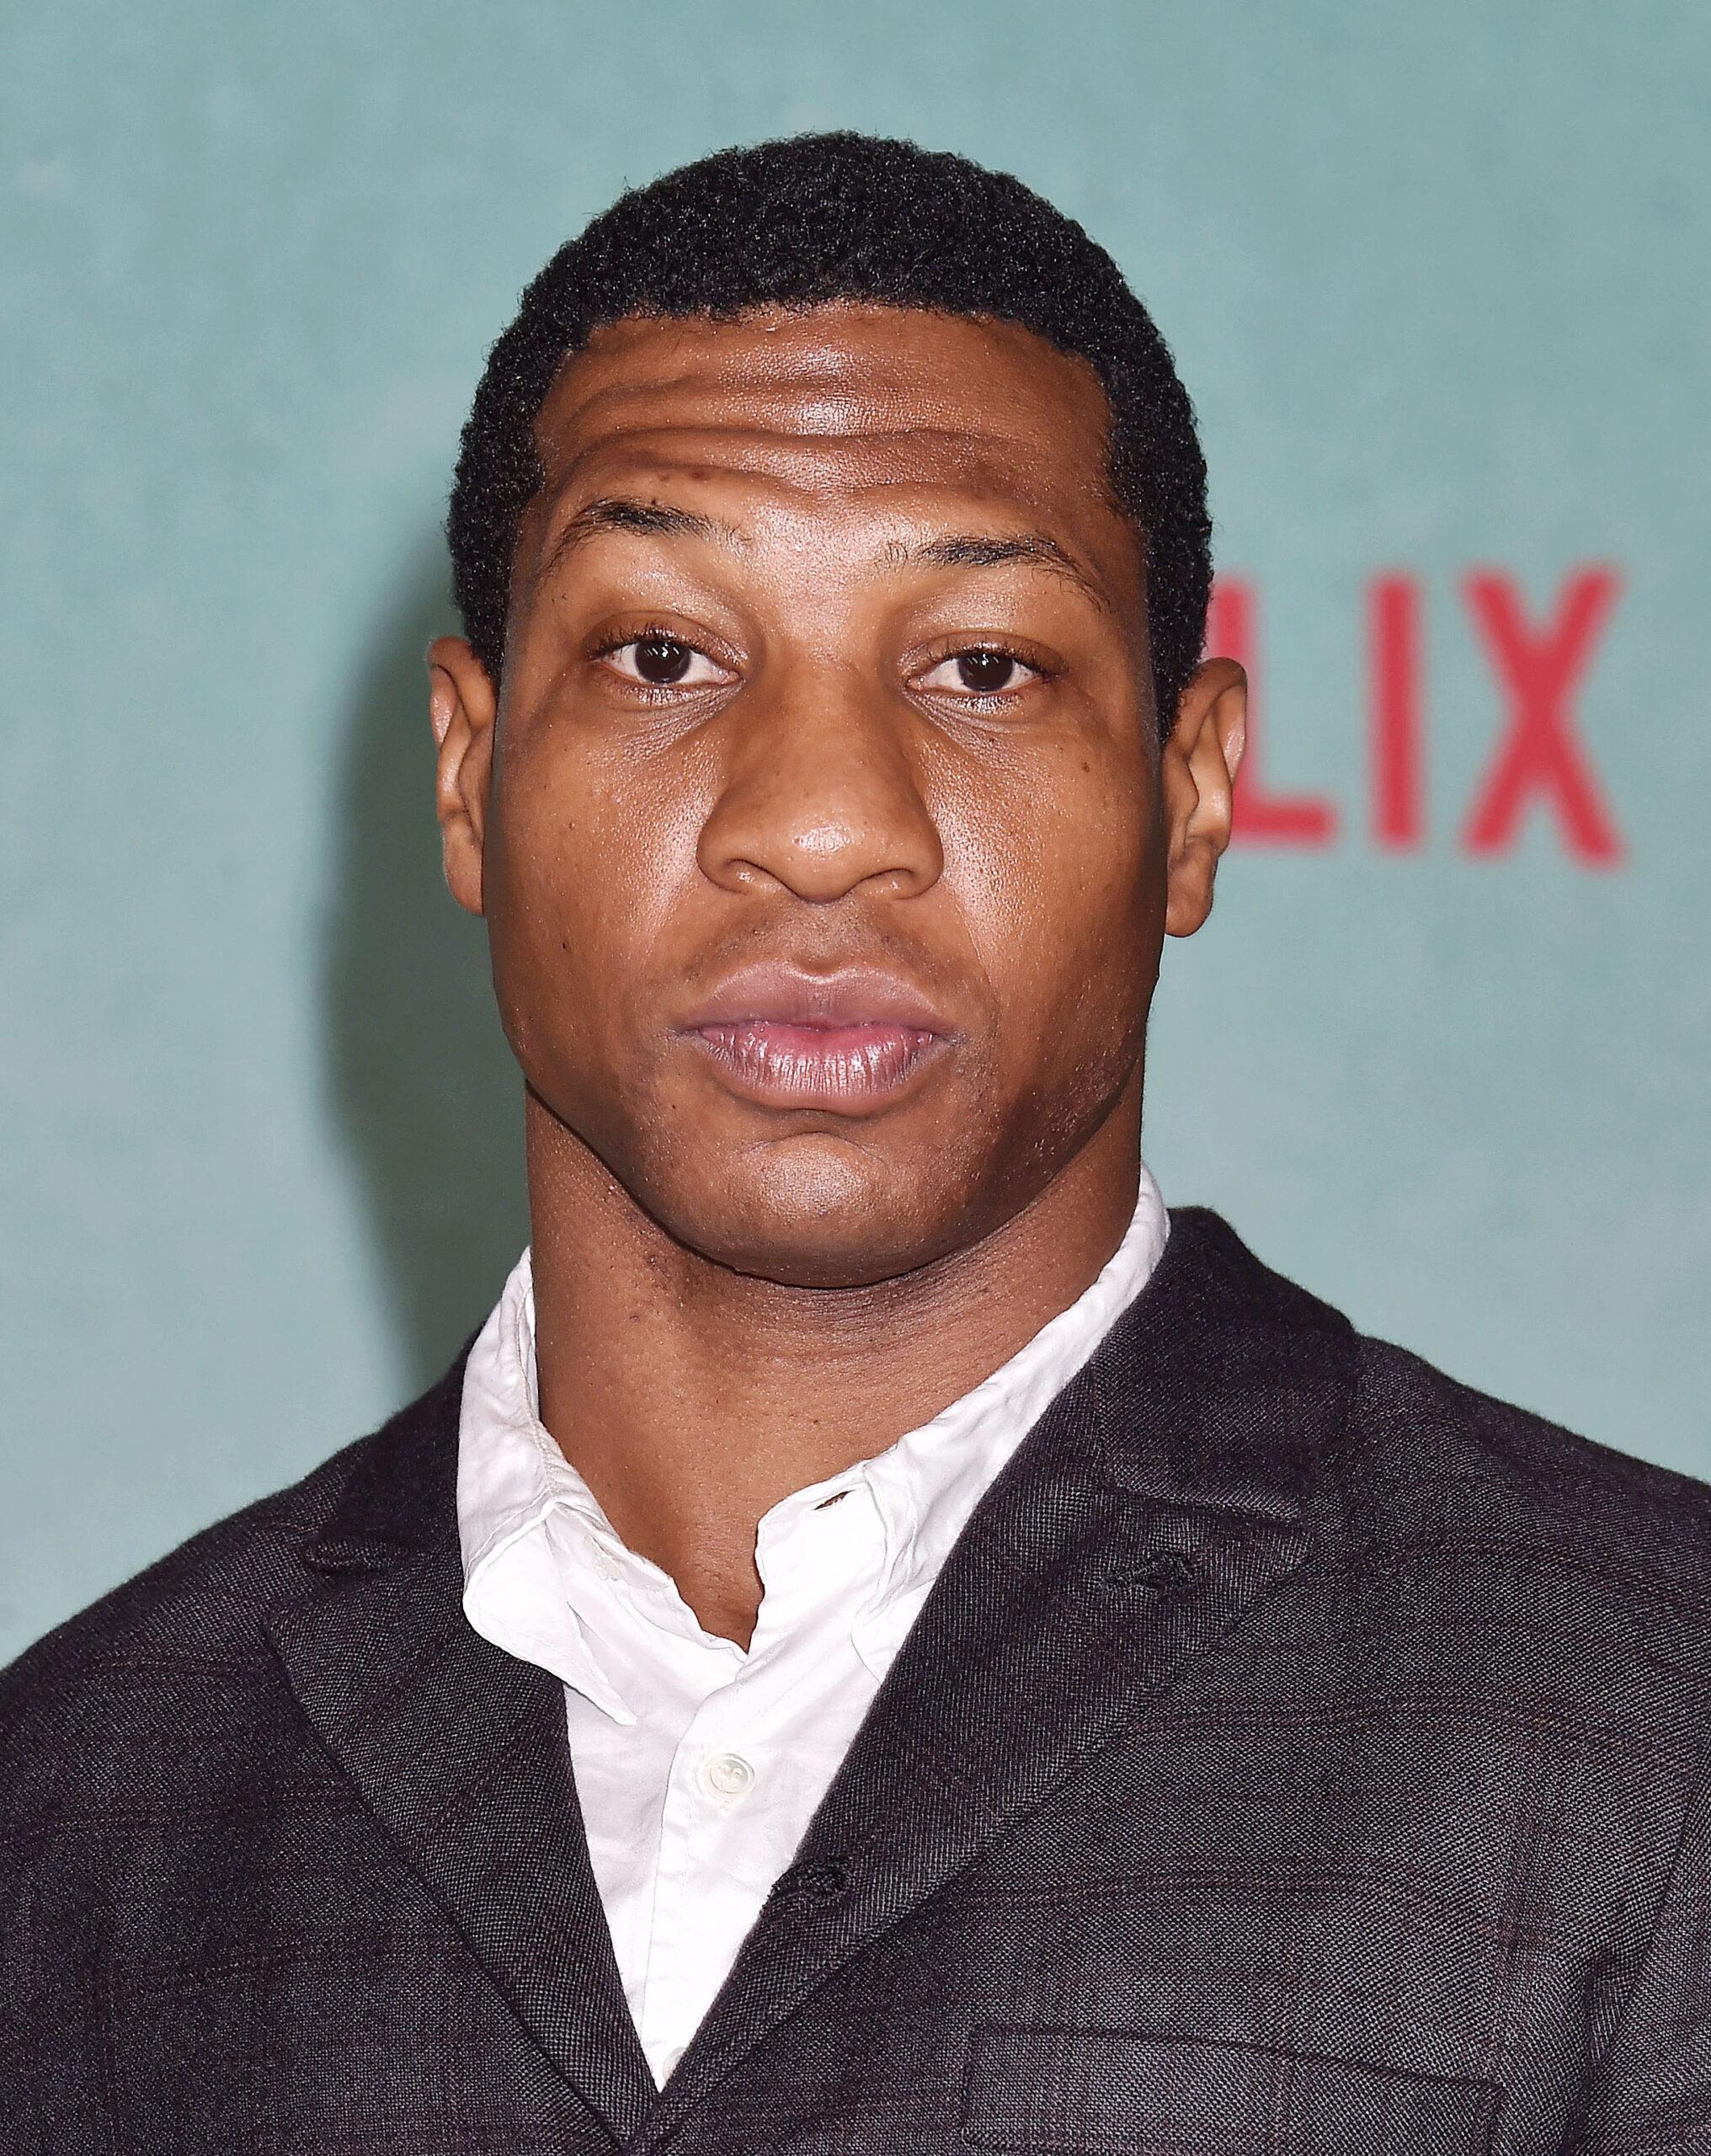 Jonathan majors at the Los Angeles Premiere Of "The Harder They Fall"